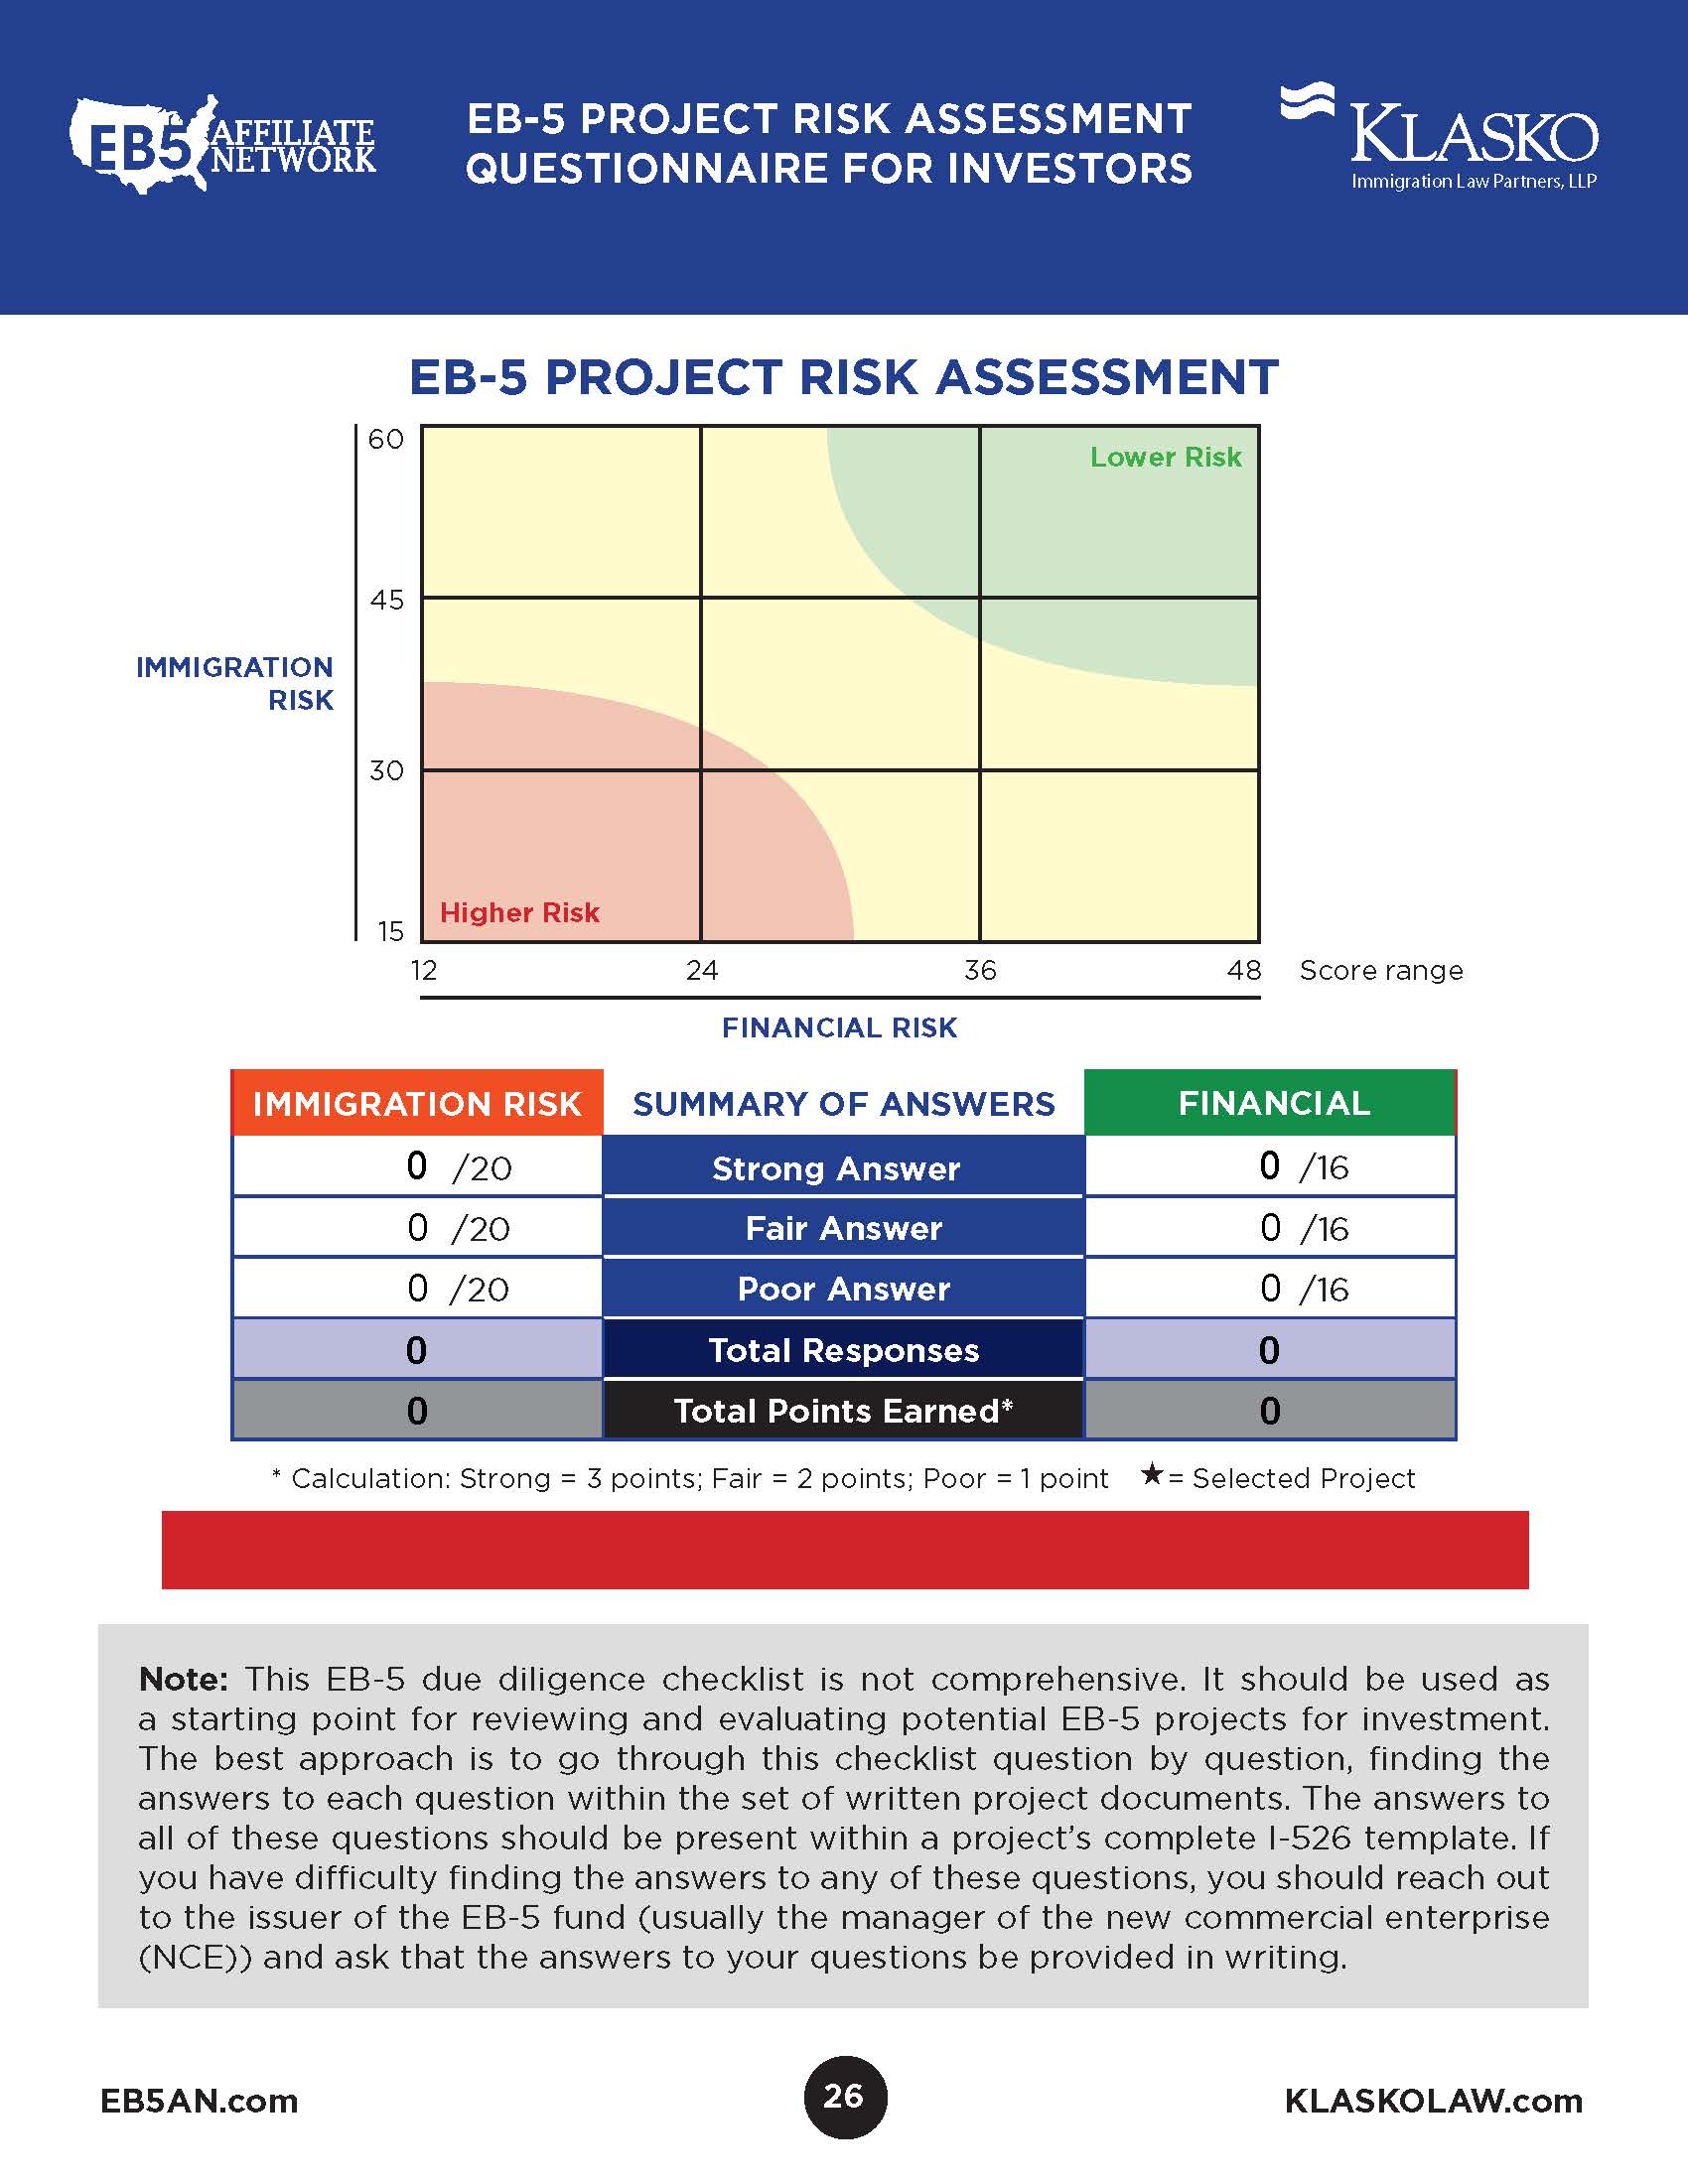 EB-5 Project Due Diligence Investor Checklist Images 26_2 11.23.16